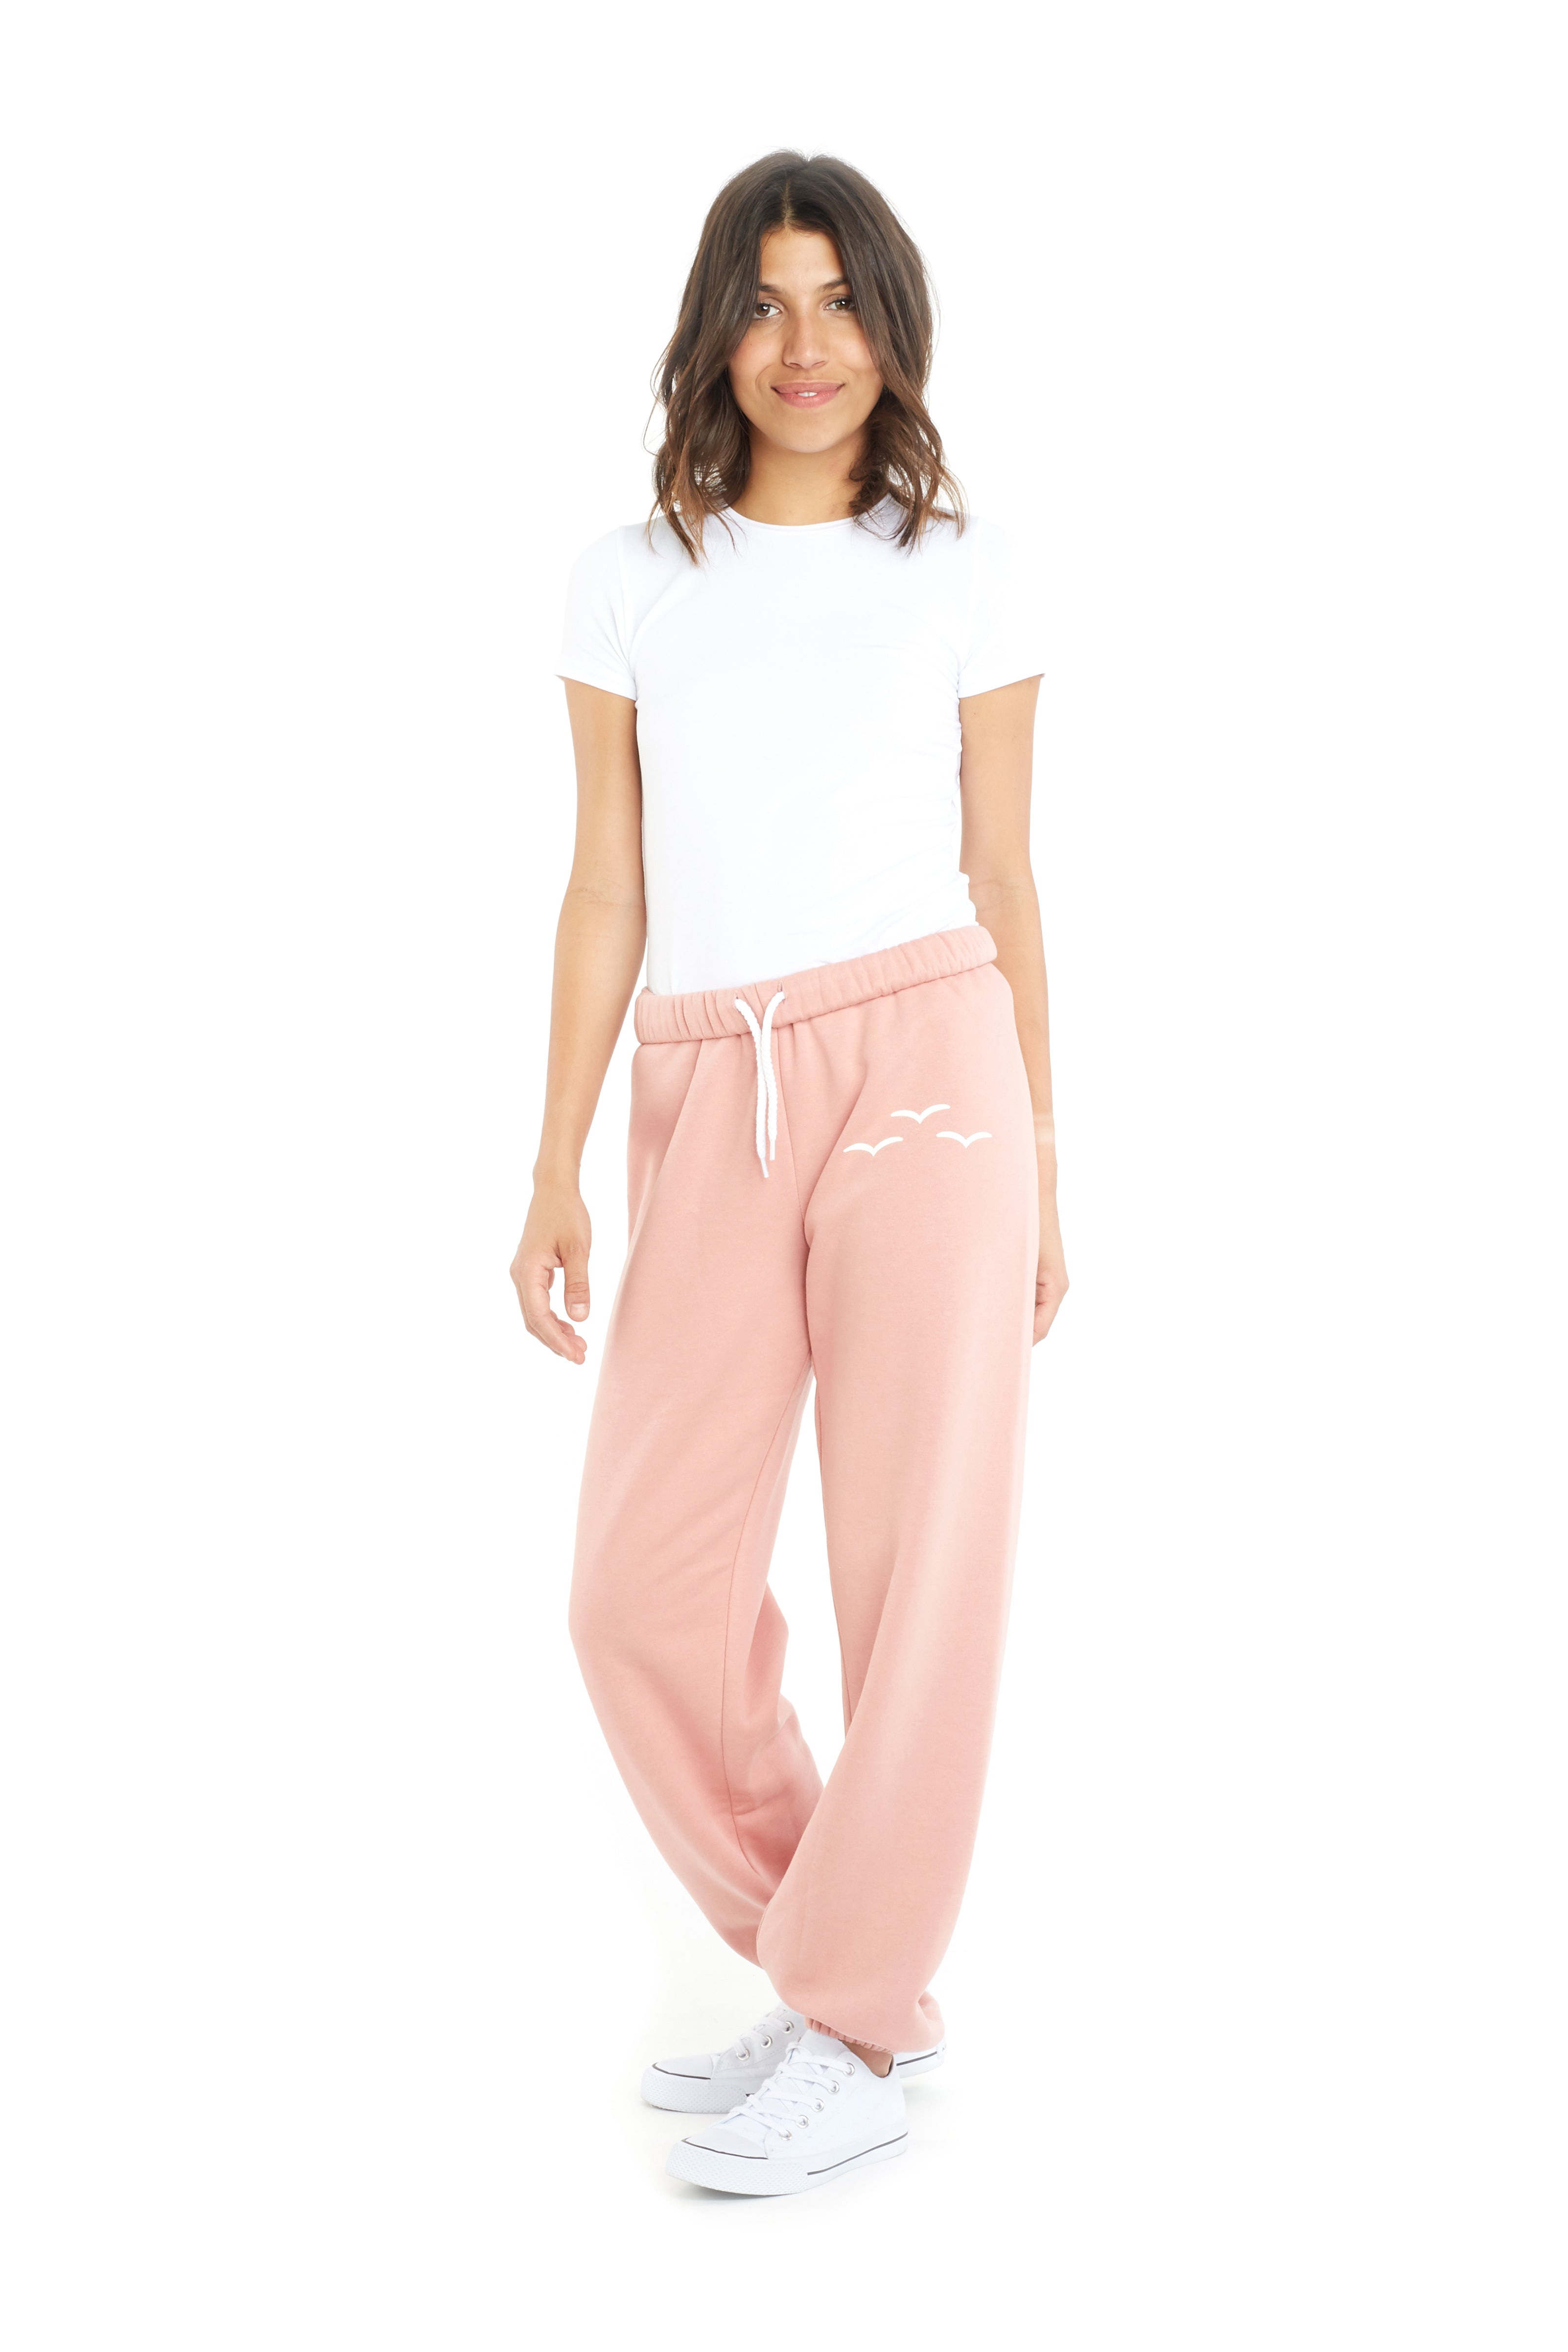 Womens > The Lazypants Canada Website. Sale Cheap Hot Products > SourceCore  Studio